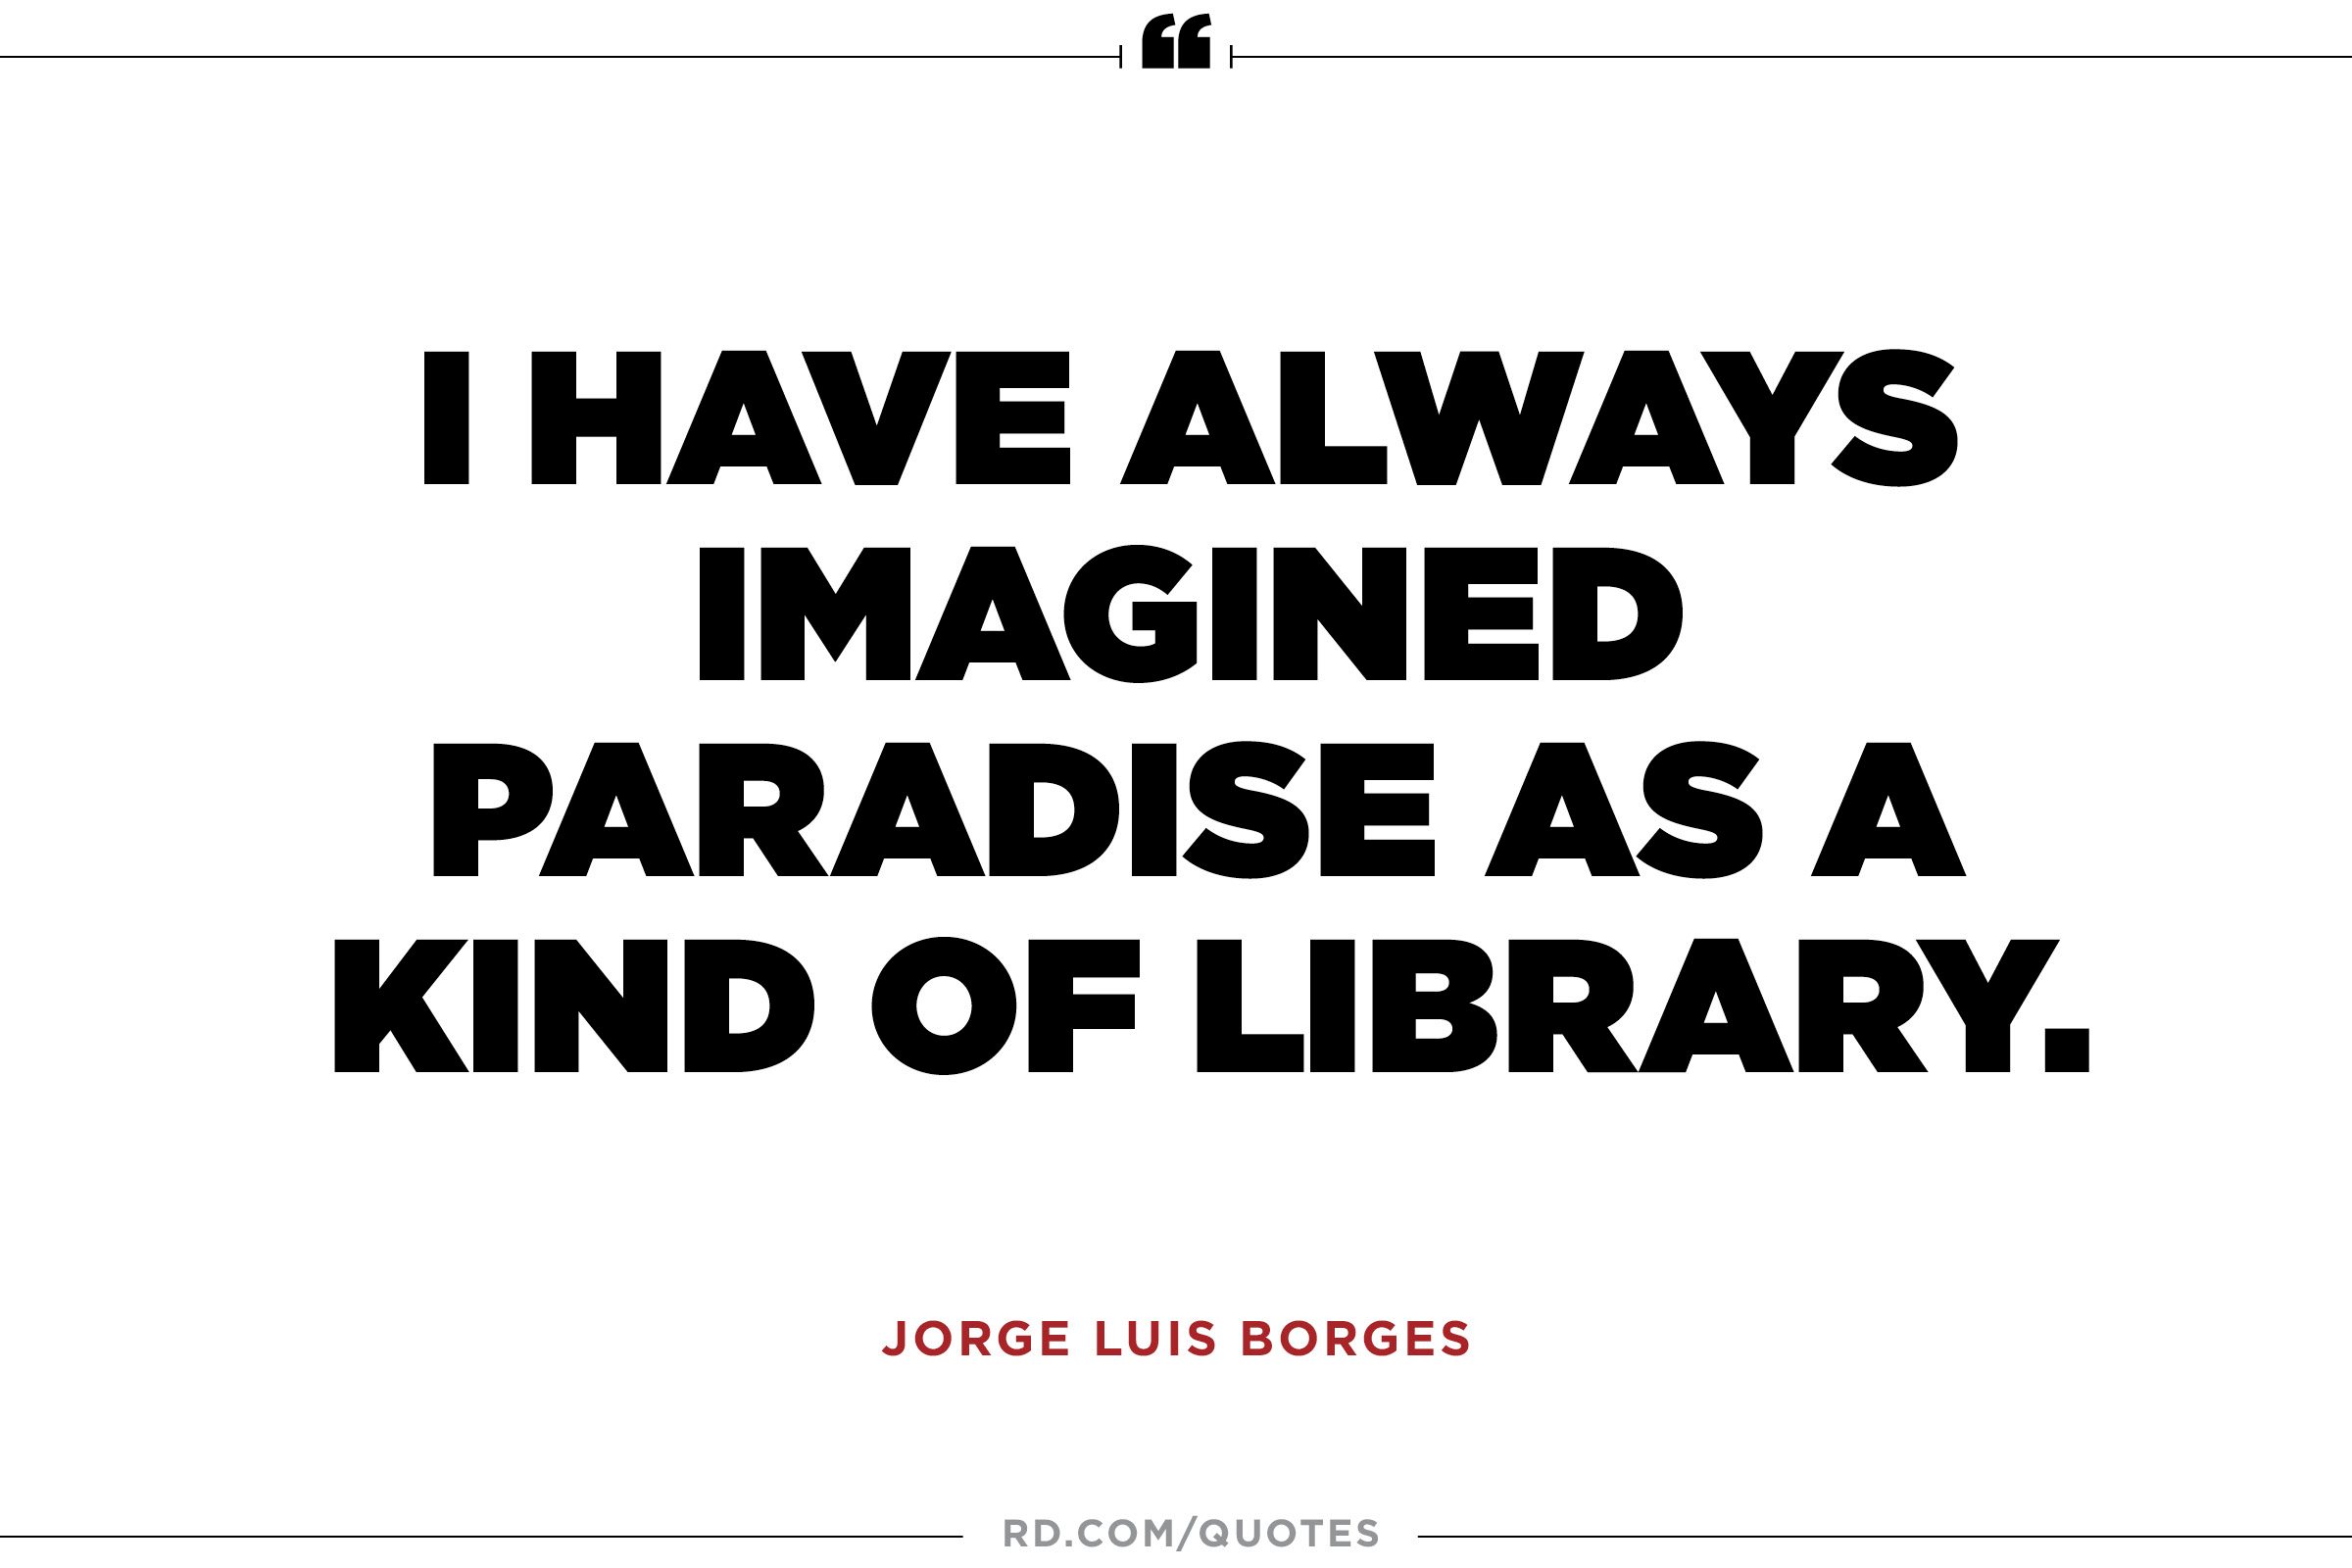 39 Perfectly Cozy Reading Quotes | Reader's Digest